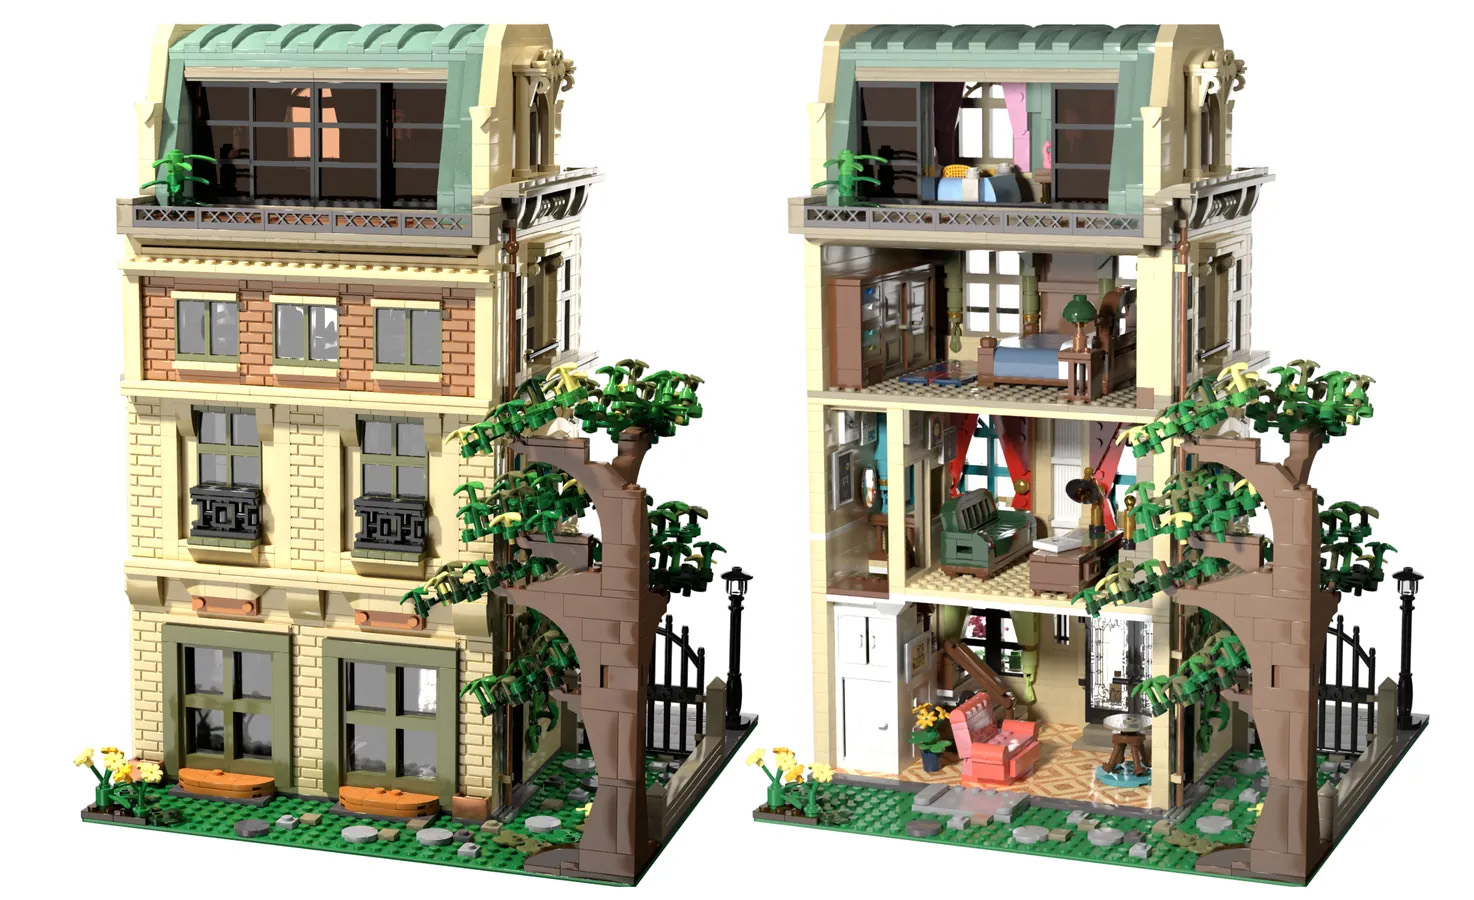 THE NANNY Achieves 10K Support on LEGO IDEAS